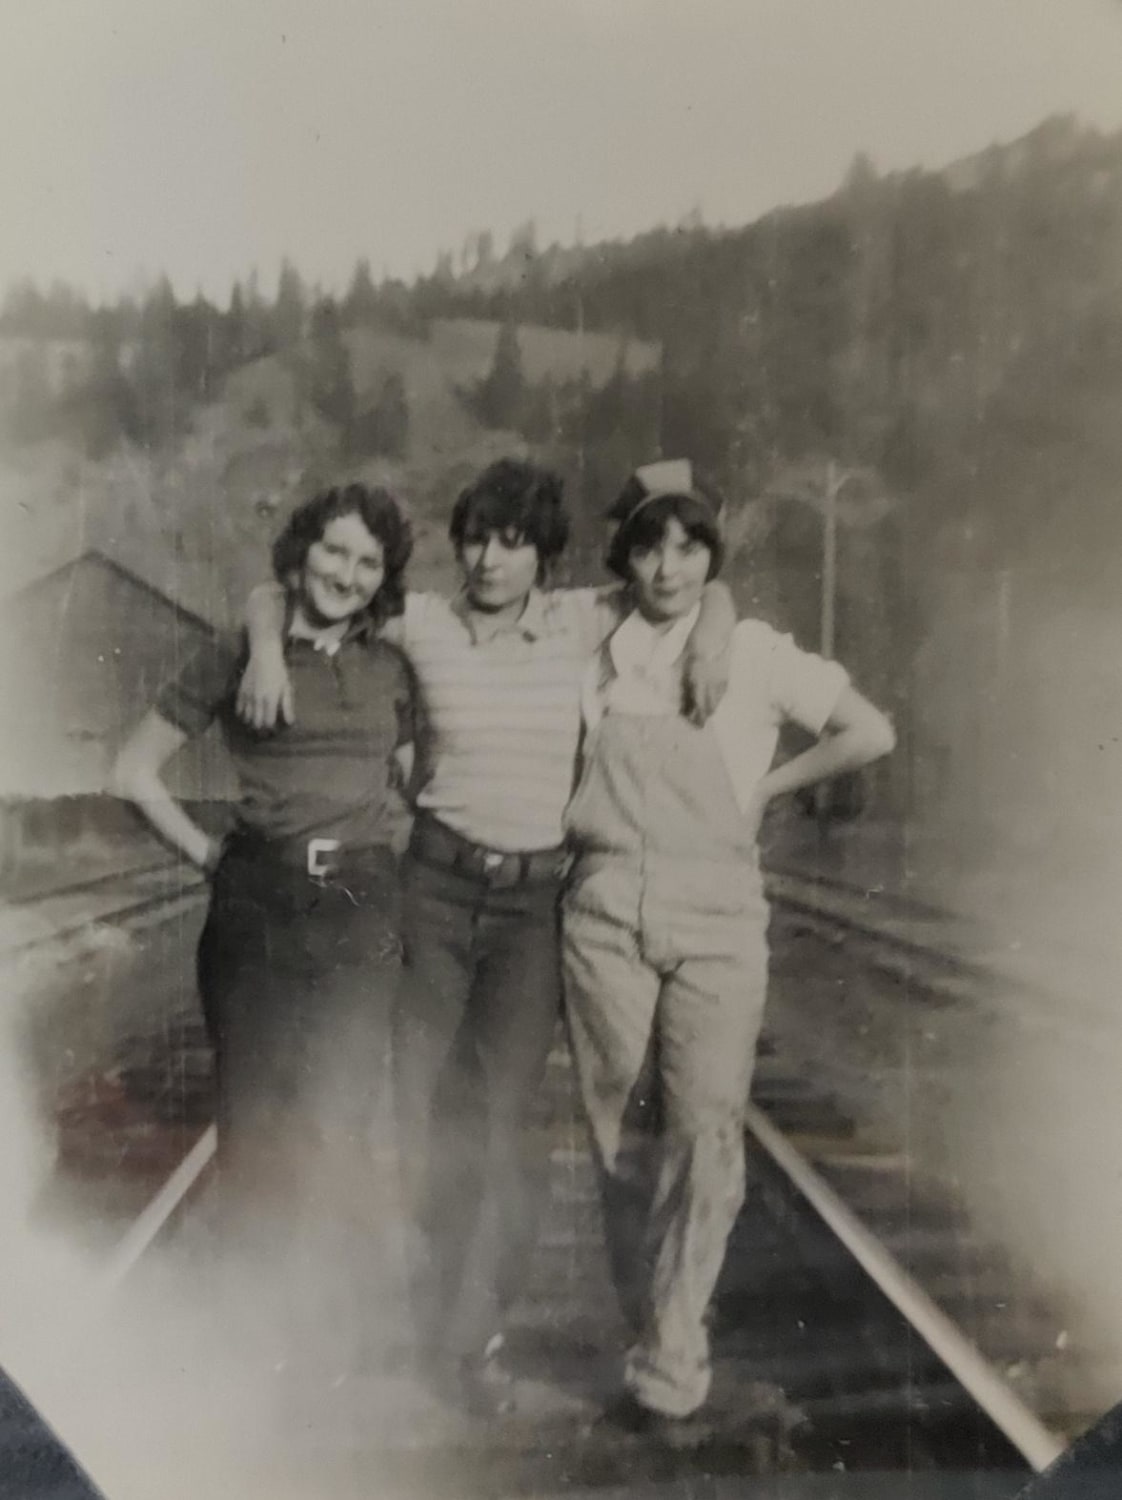 My grandmother and her best friends either late 1929's or early 1930's.